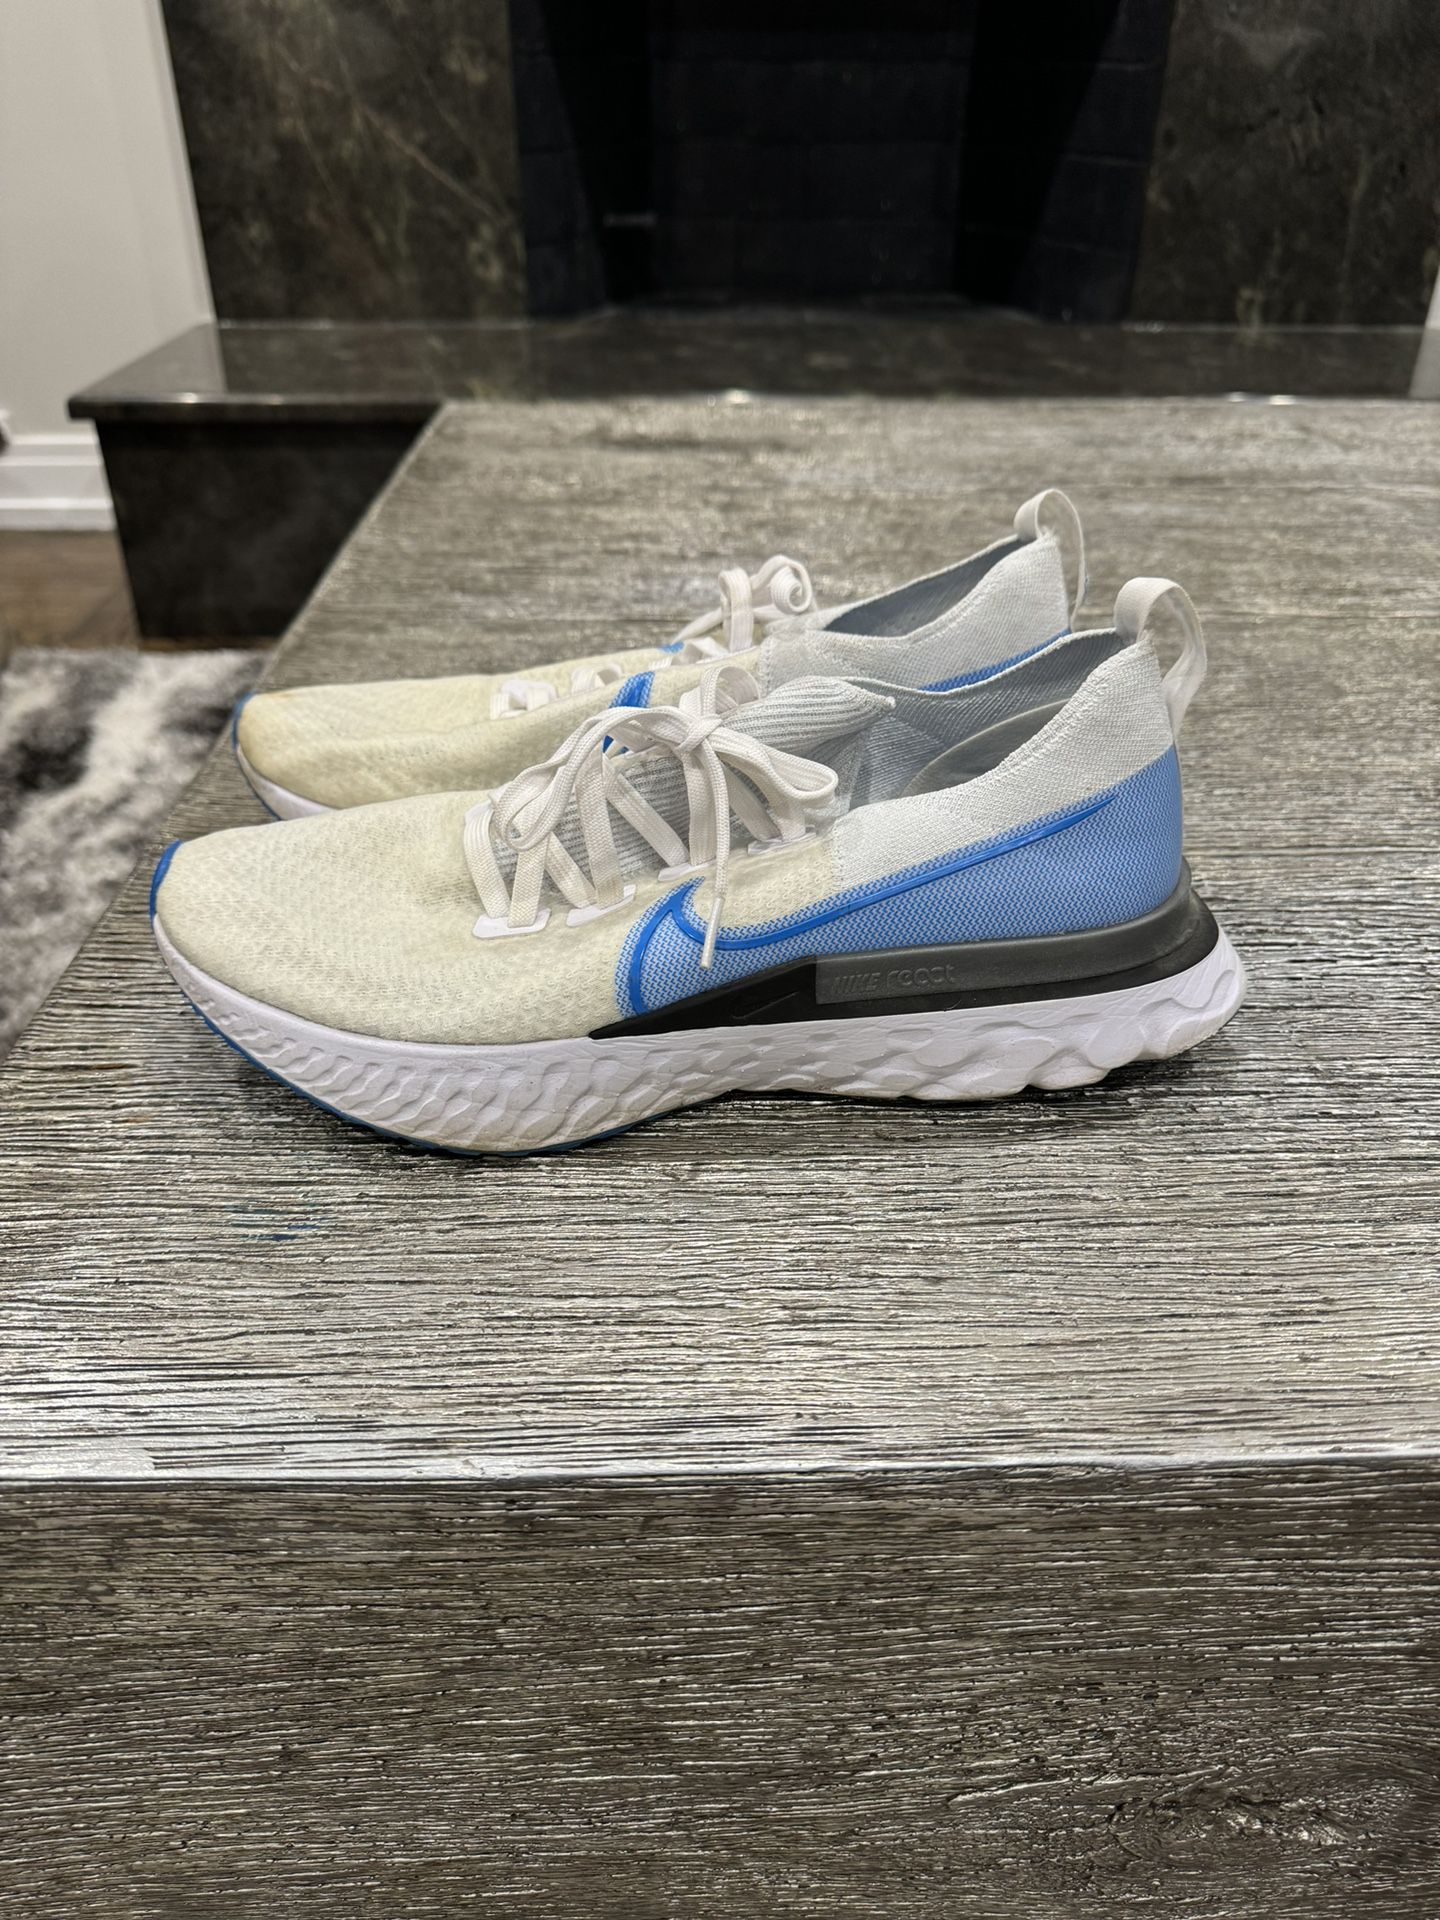 Nike Zoom Fly Running Shoes 12.5